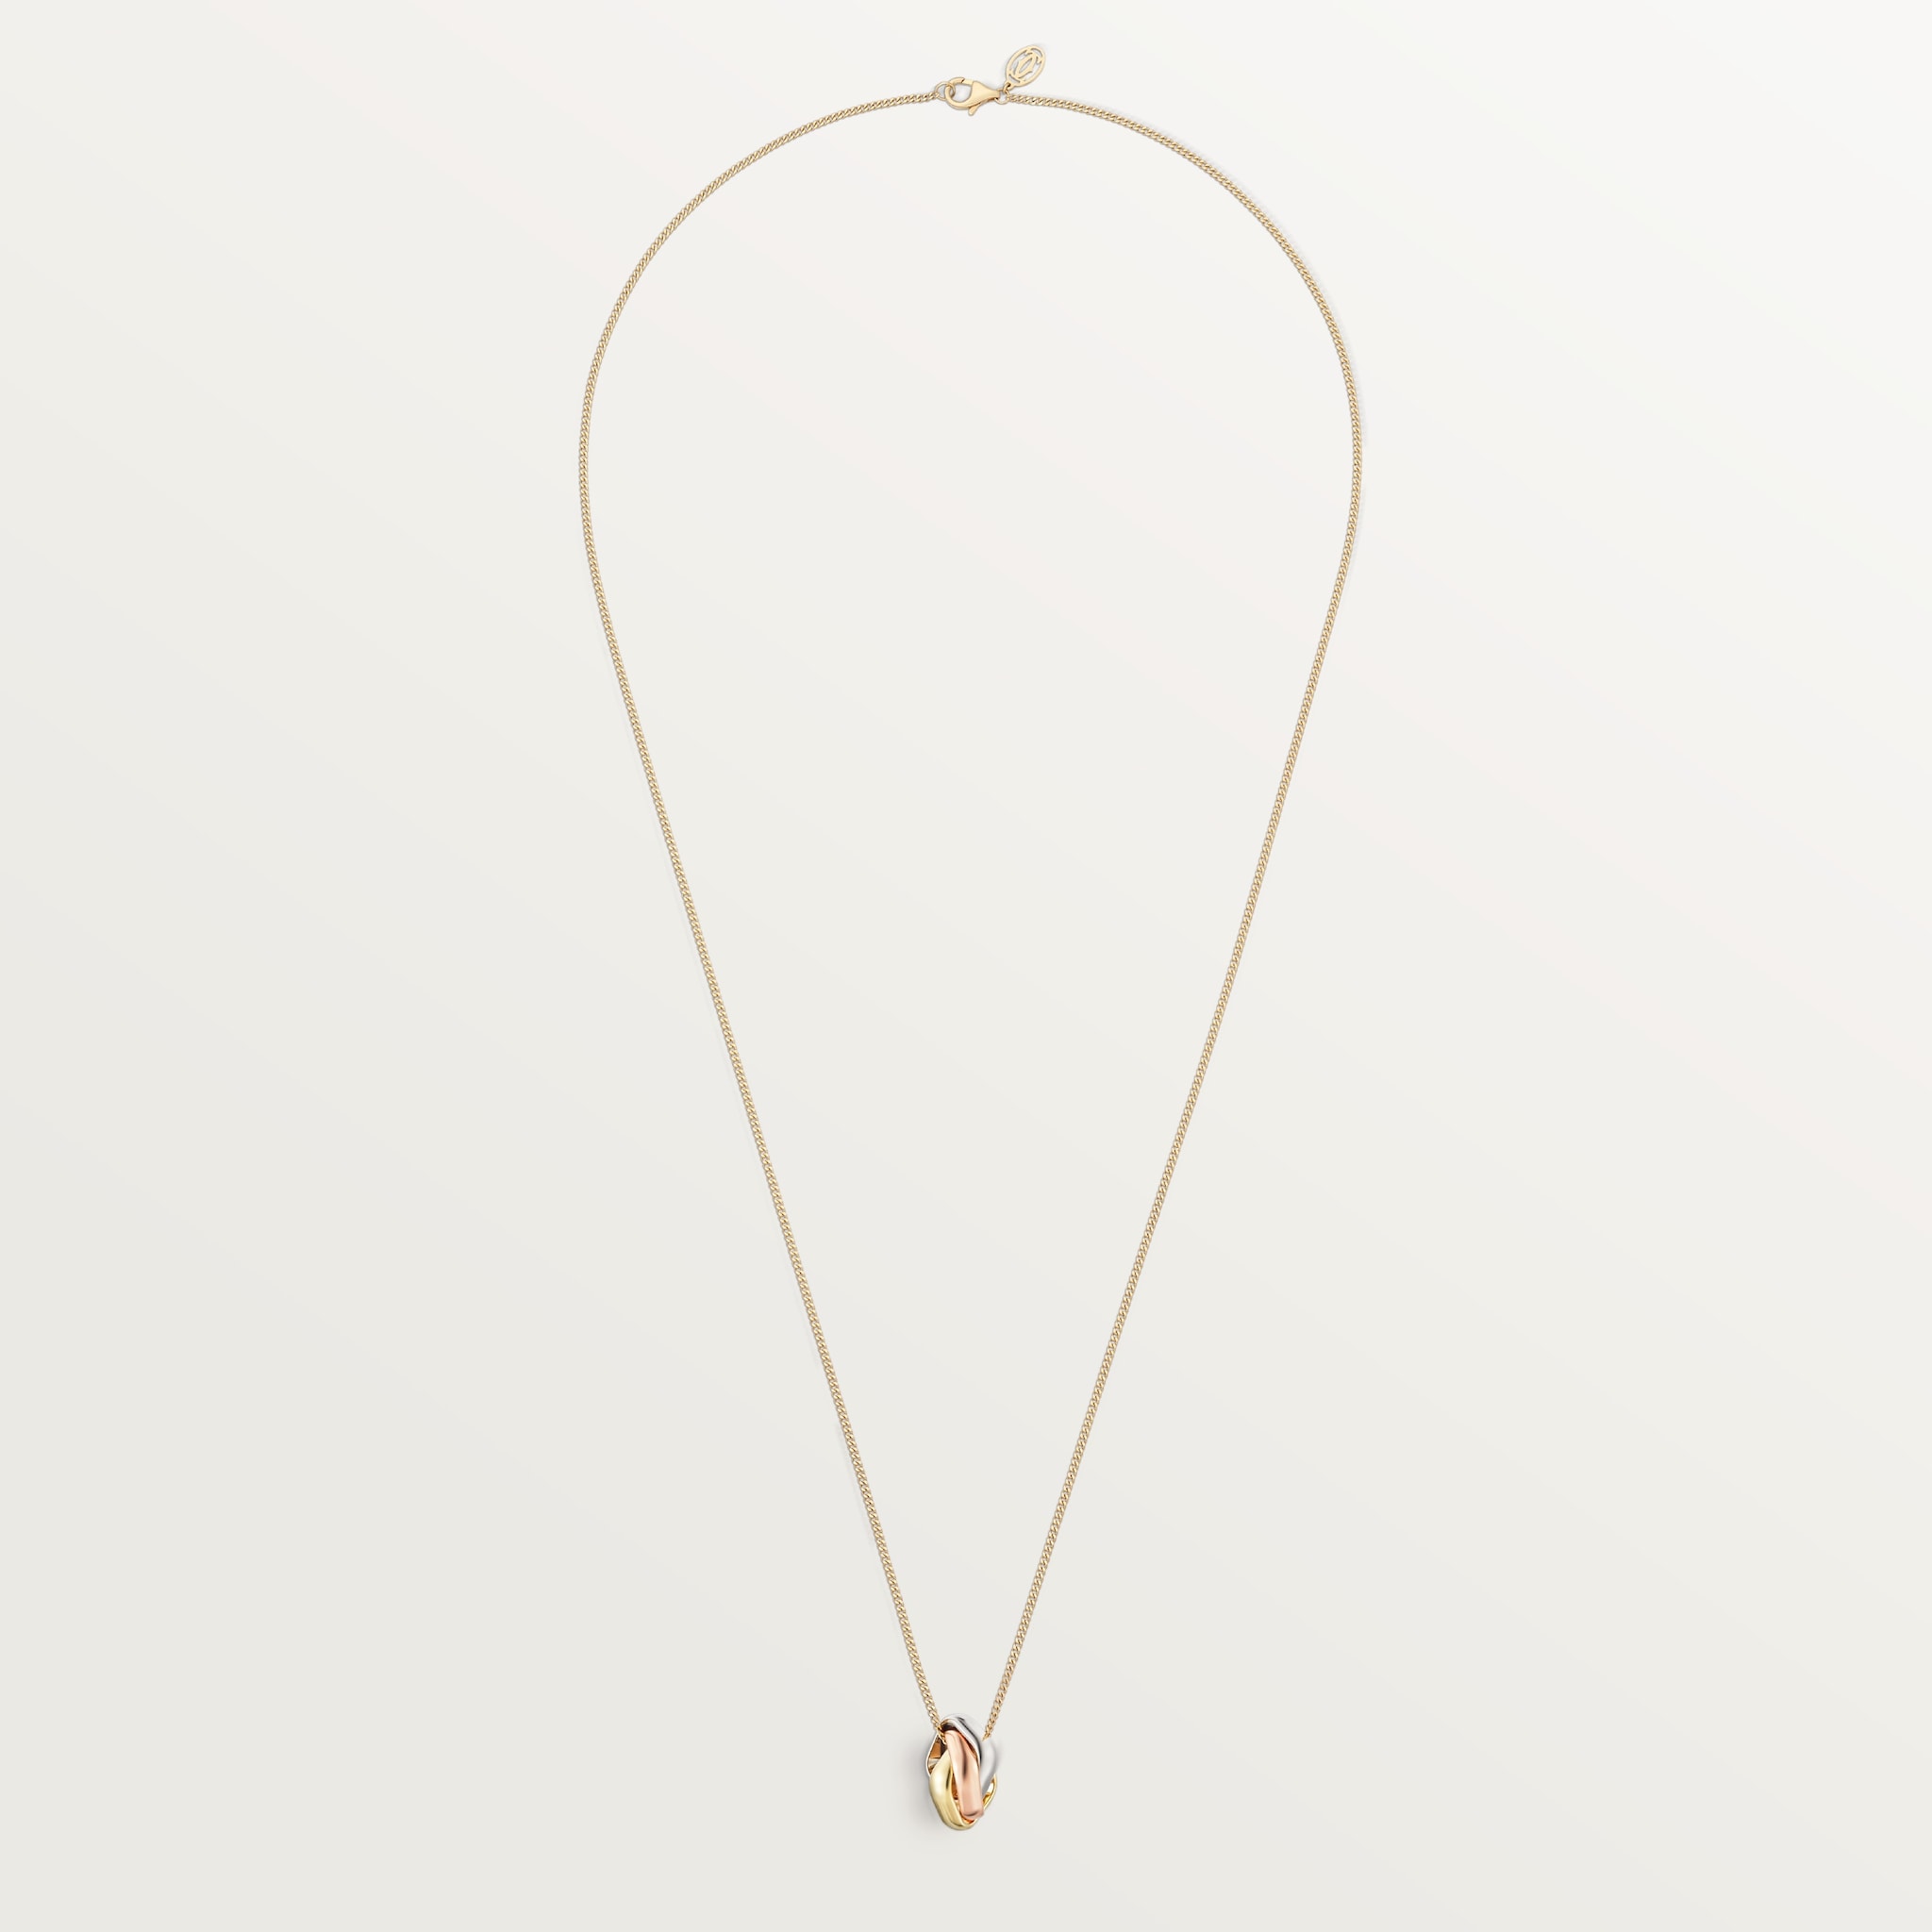 Trinity cushion necklaceWhite gold, yellow gold, rose gold